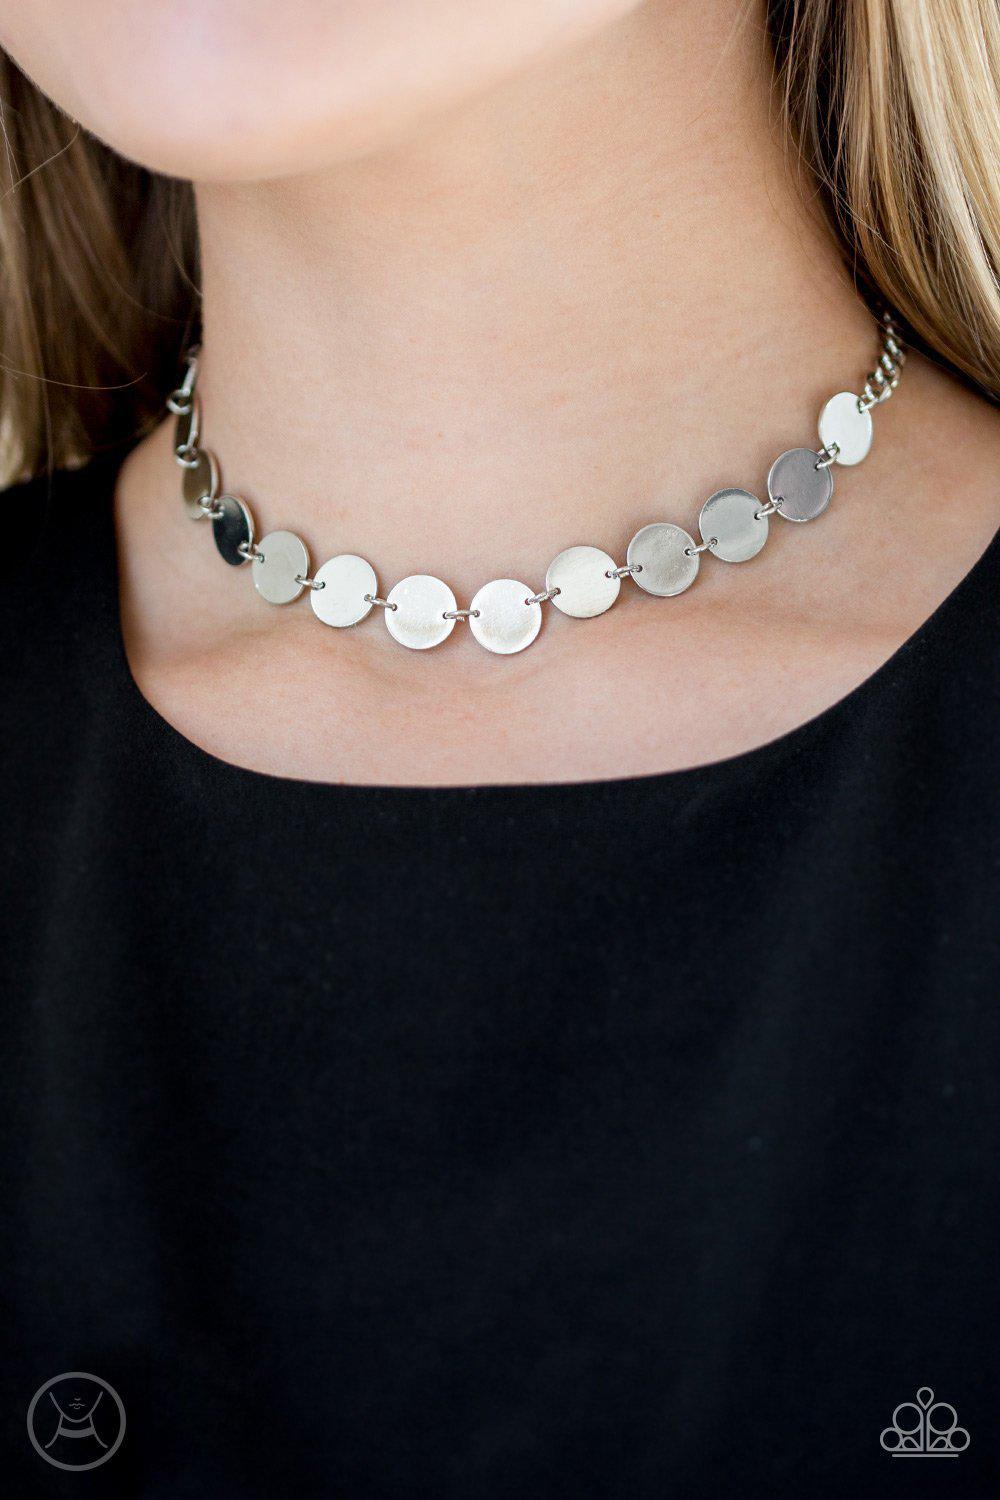 Faster Than SPOTLIGHT Silver Choker Necklace and matching Earrings - Paparazzi Accessories-CarasShop.com - $5 Jewelry by Cara Jewels